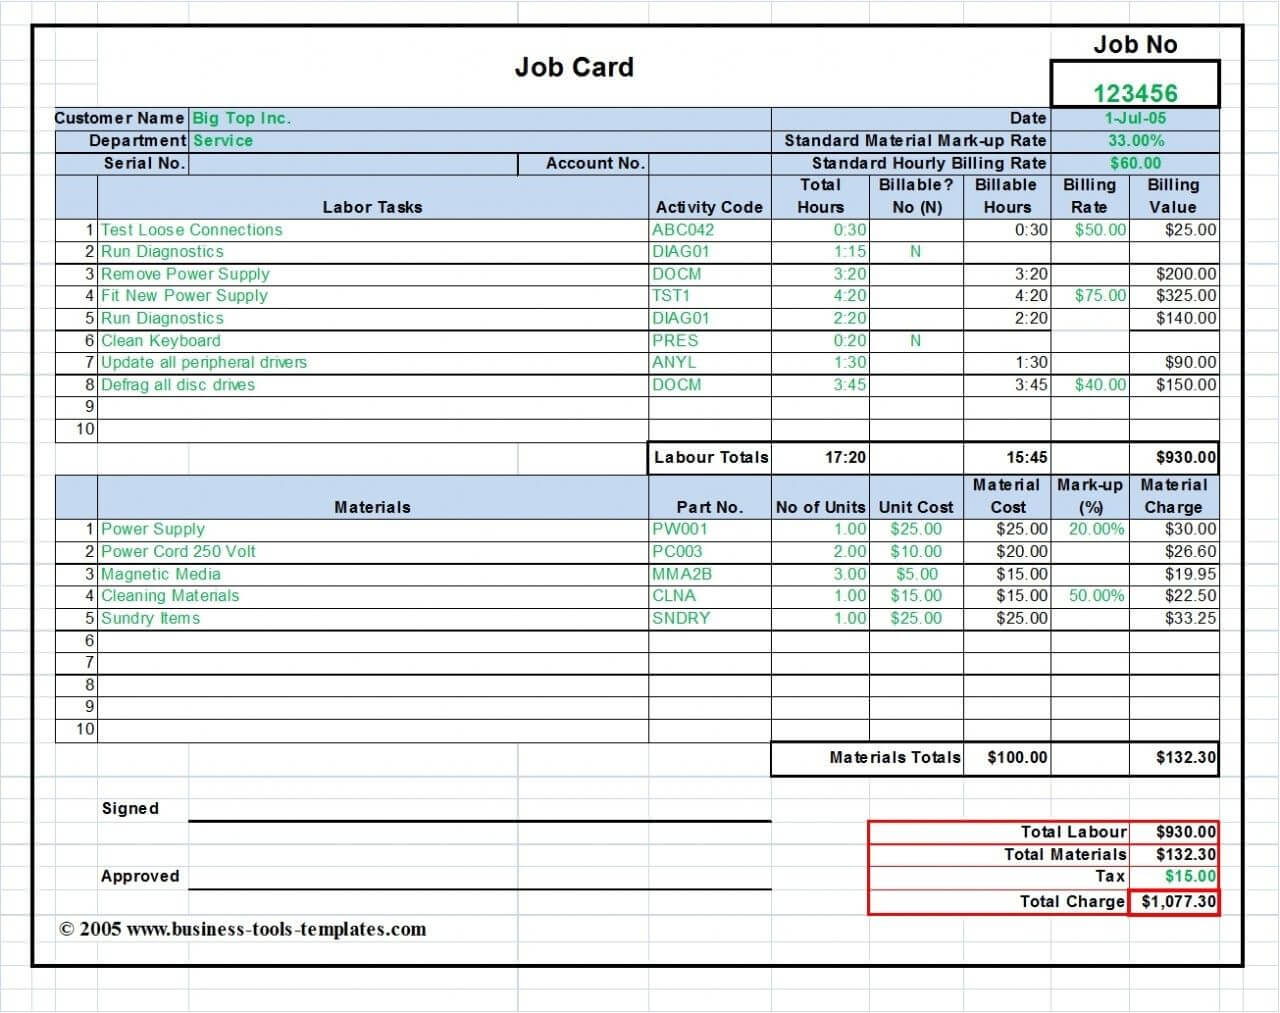 Workshop Job Card Template Excel, Labor & Material Cost For Maintenance Job Card Template